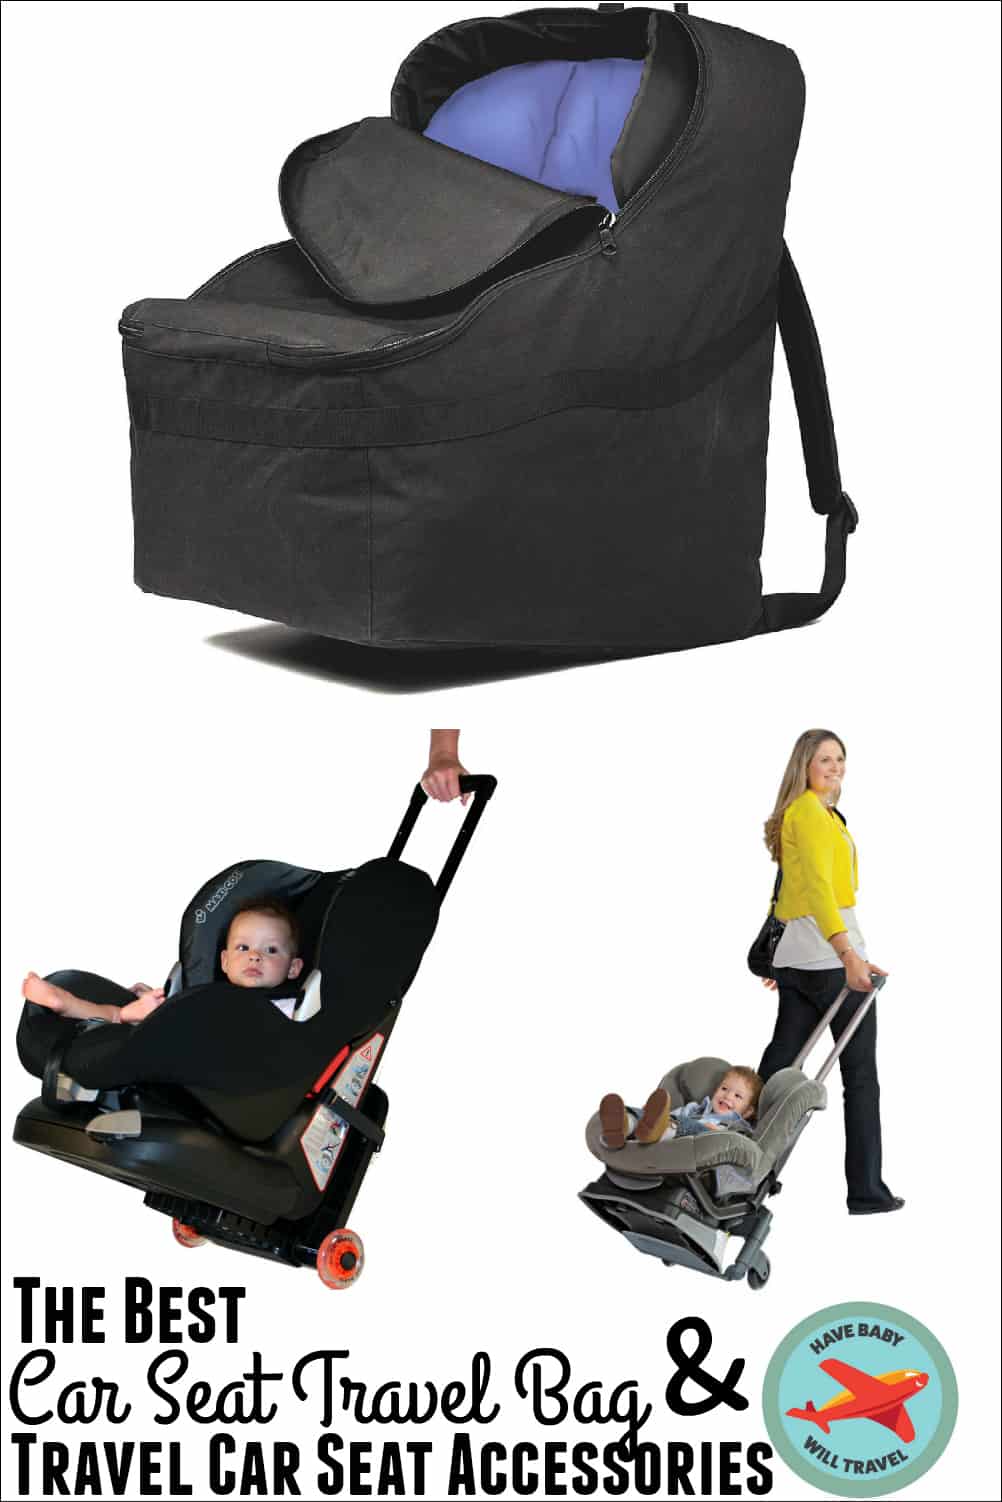 Easy to Carry Car Seat Carrier for Airport Car Seat Bag with E-Book Infant Car Seat Travel Bag Padded Straps Ideal Gate Check Bag Carseat Travel Bag for Airplane Pouch and Backpack 